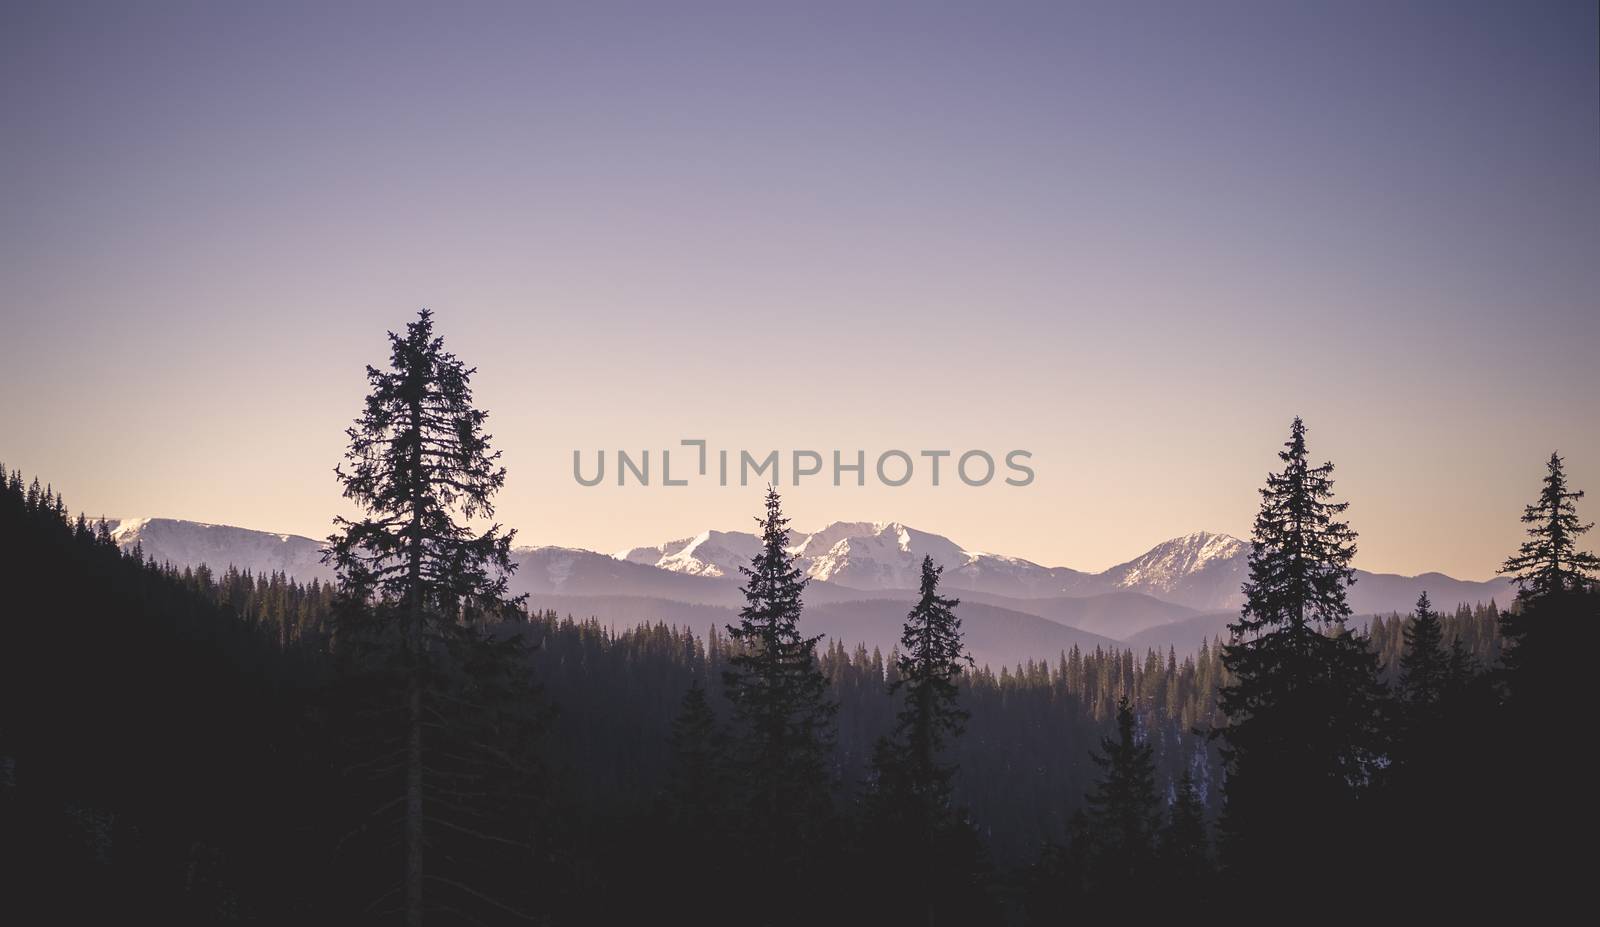 Vintage landscape of the mountain ridge. High pine trees in the foreground. Winter. Sky is clear. Purple tone. Vignette effect.